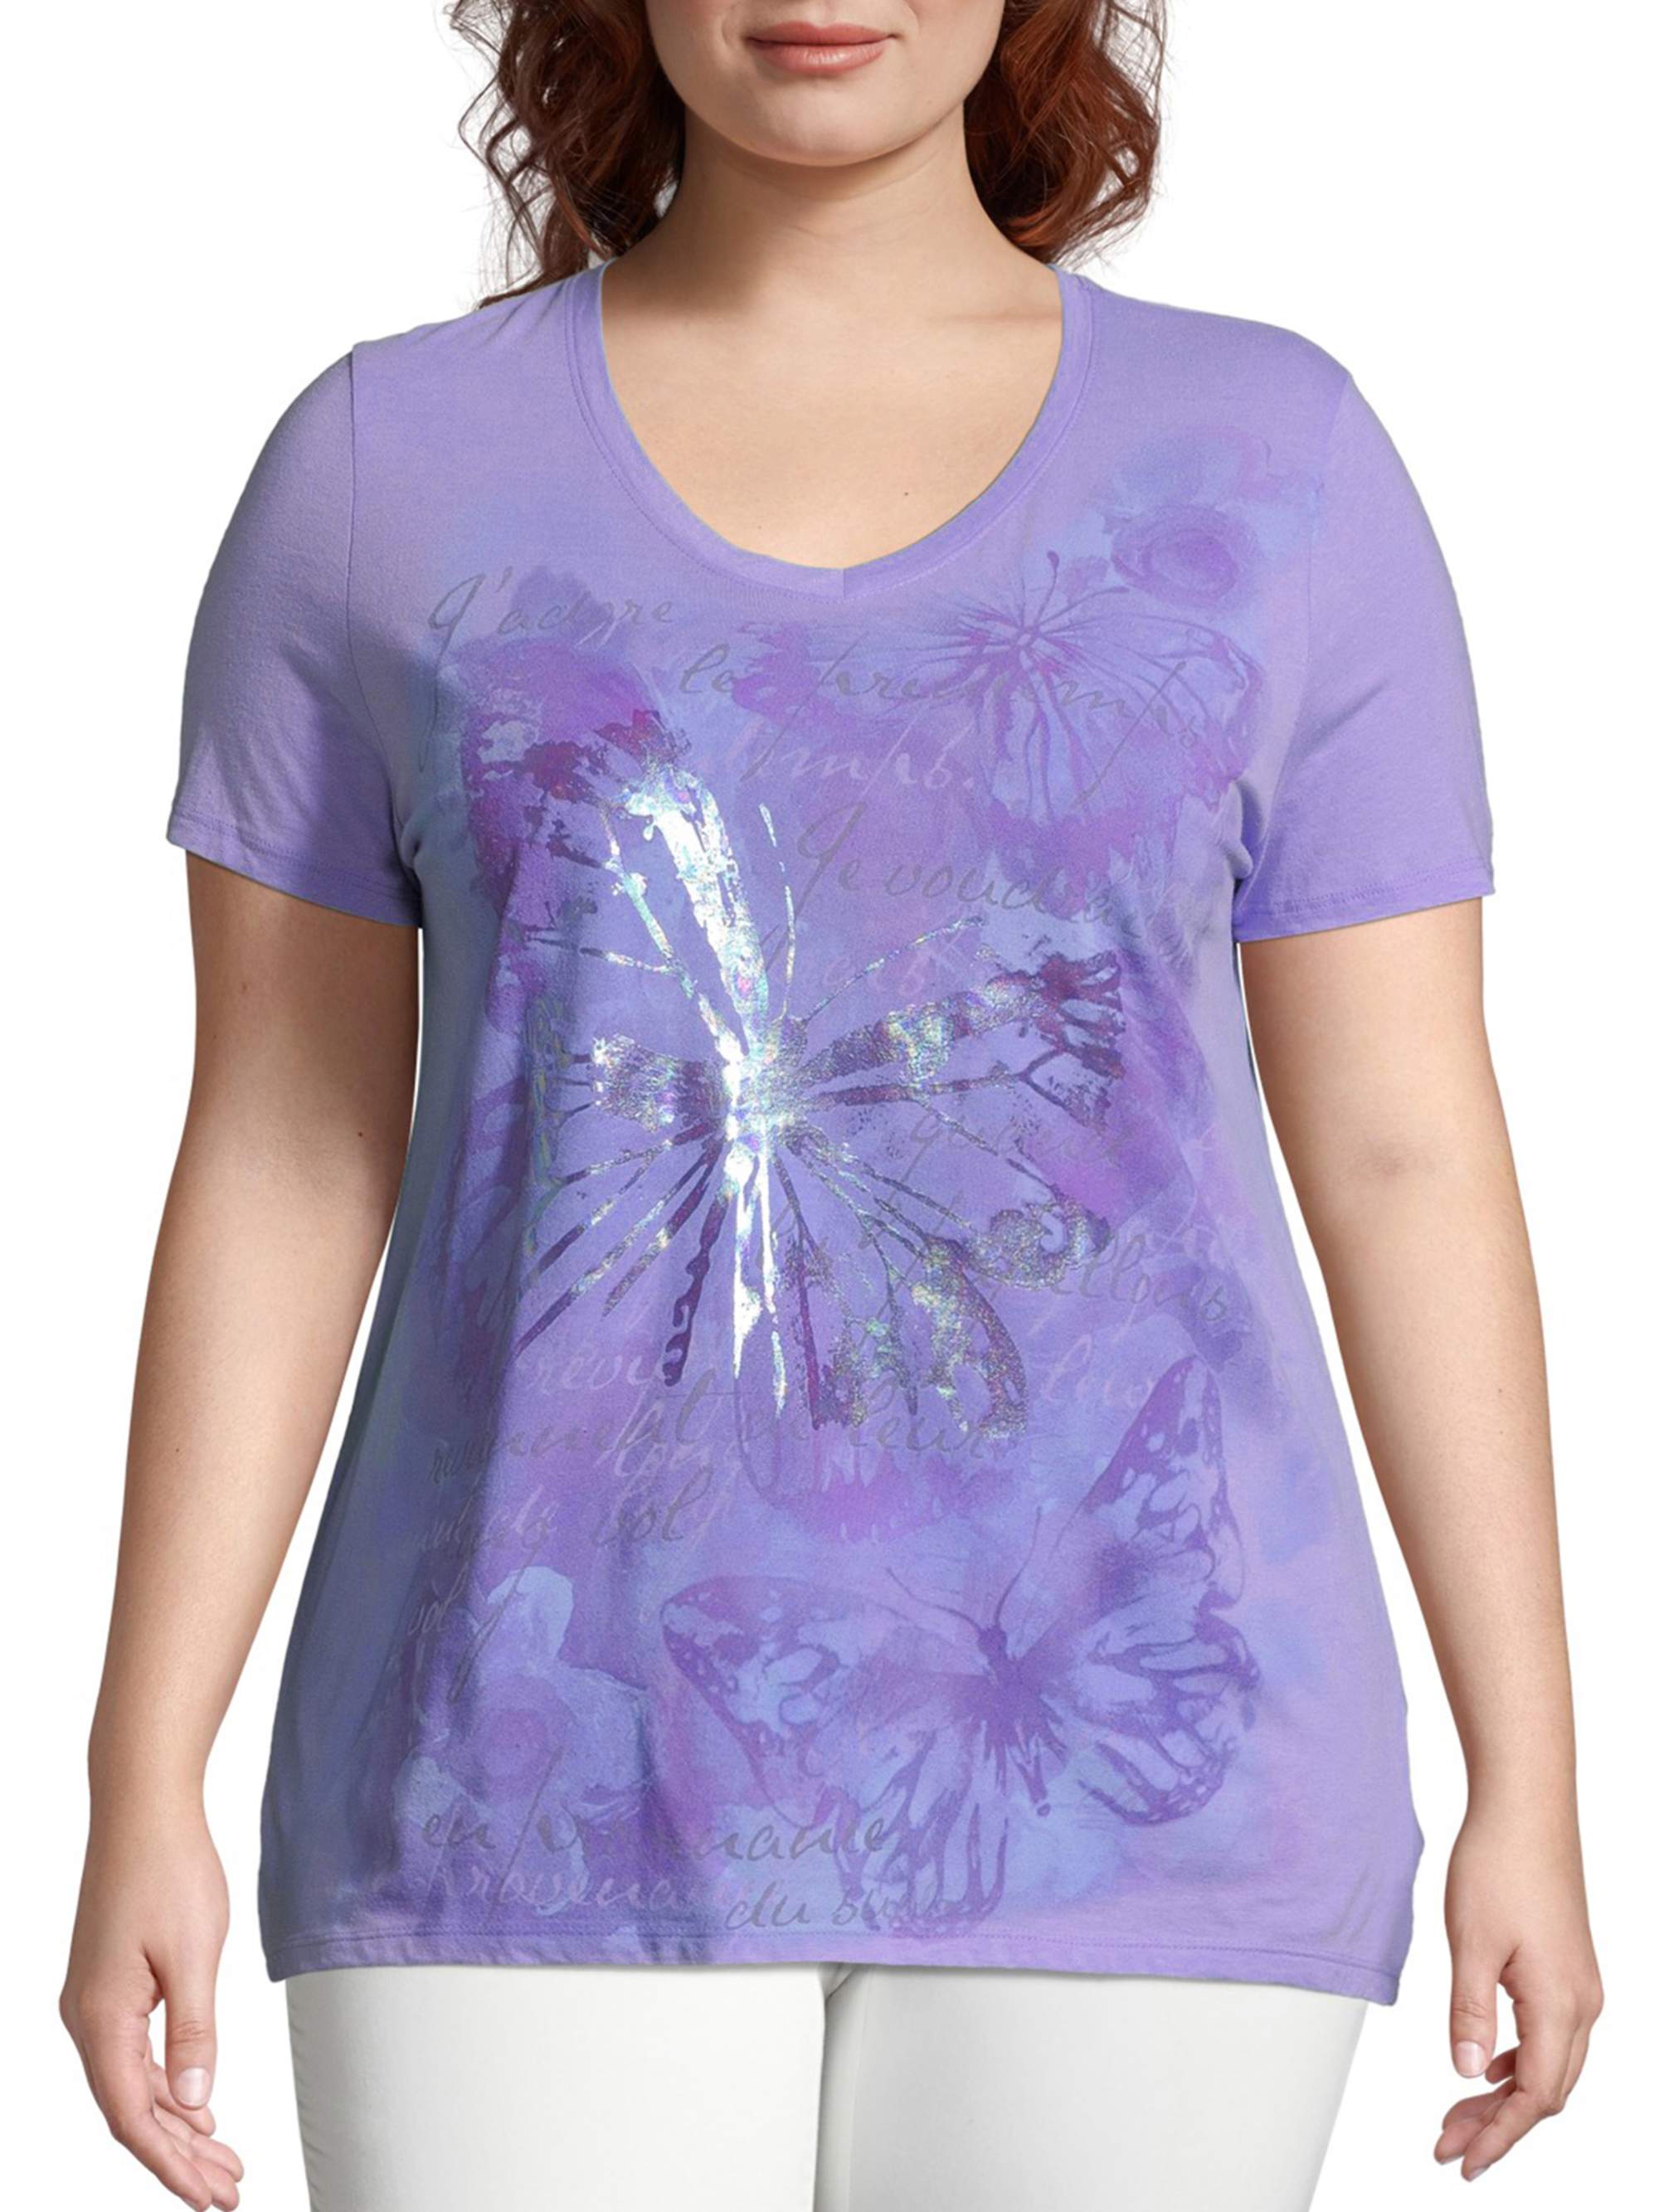 Just My Size Women's Plus Size Graphic Short Sleeve V-neck Tee - image 1 of 5